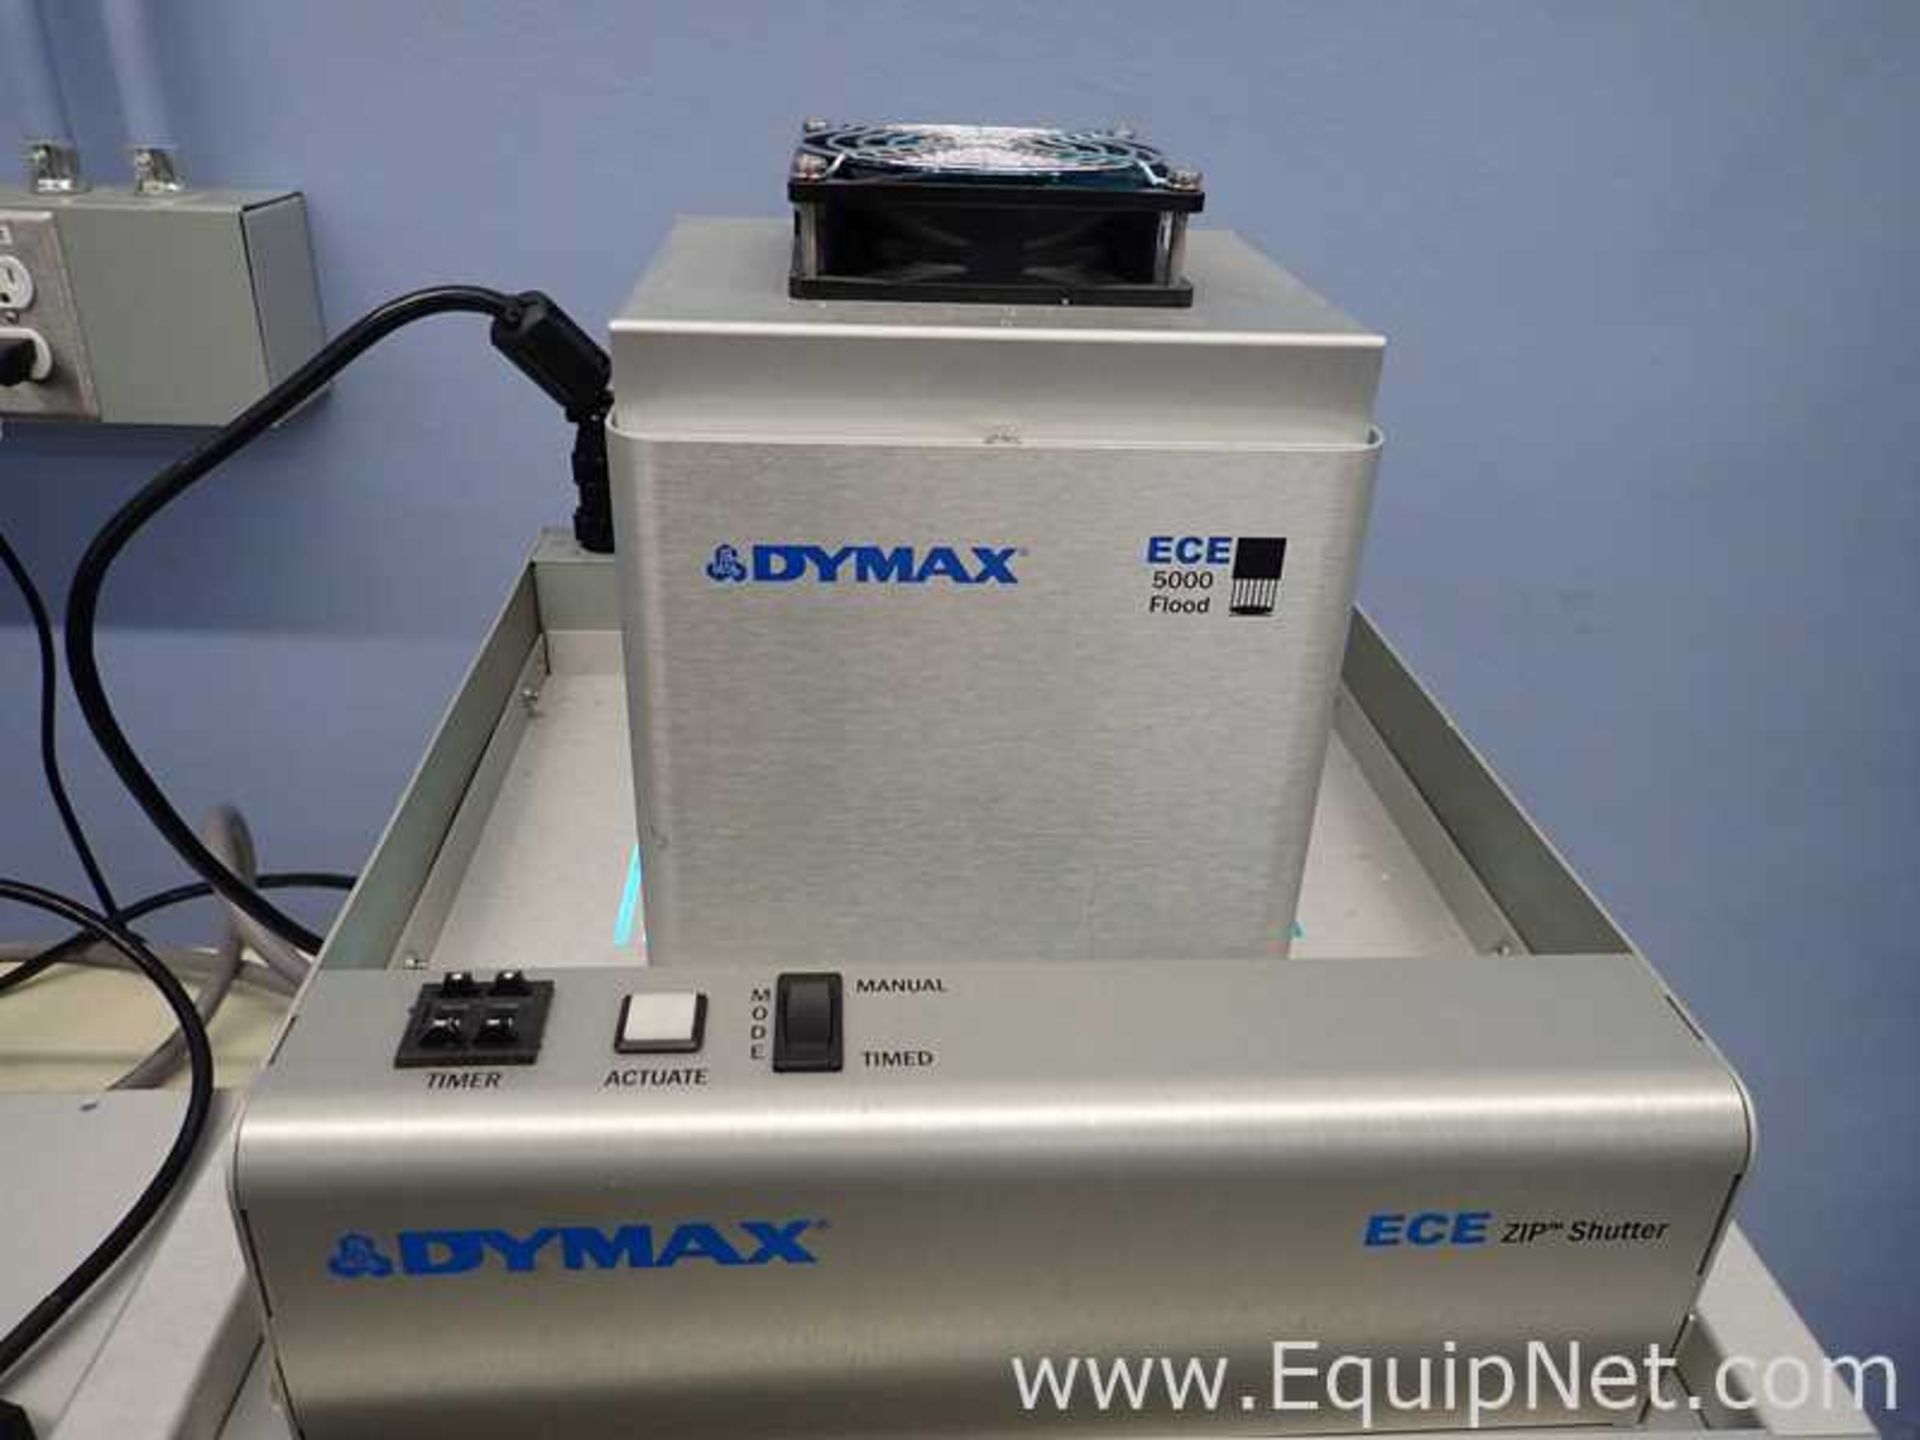 Dymax ECE Series UV Light-Curing Flood Lamp Systems - Image 11 of 31